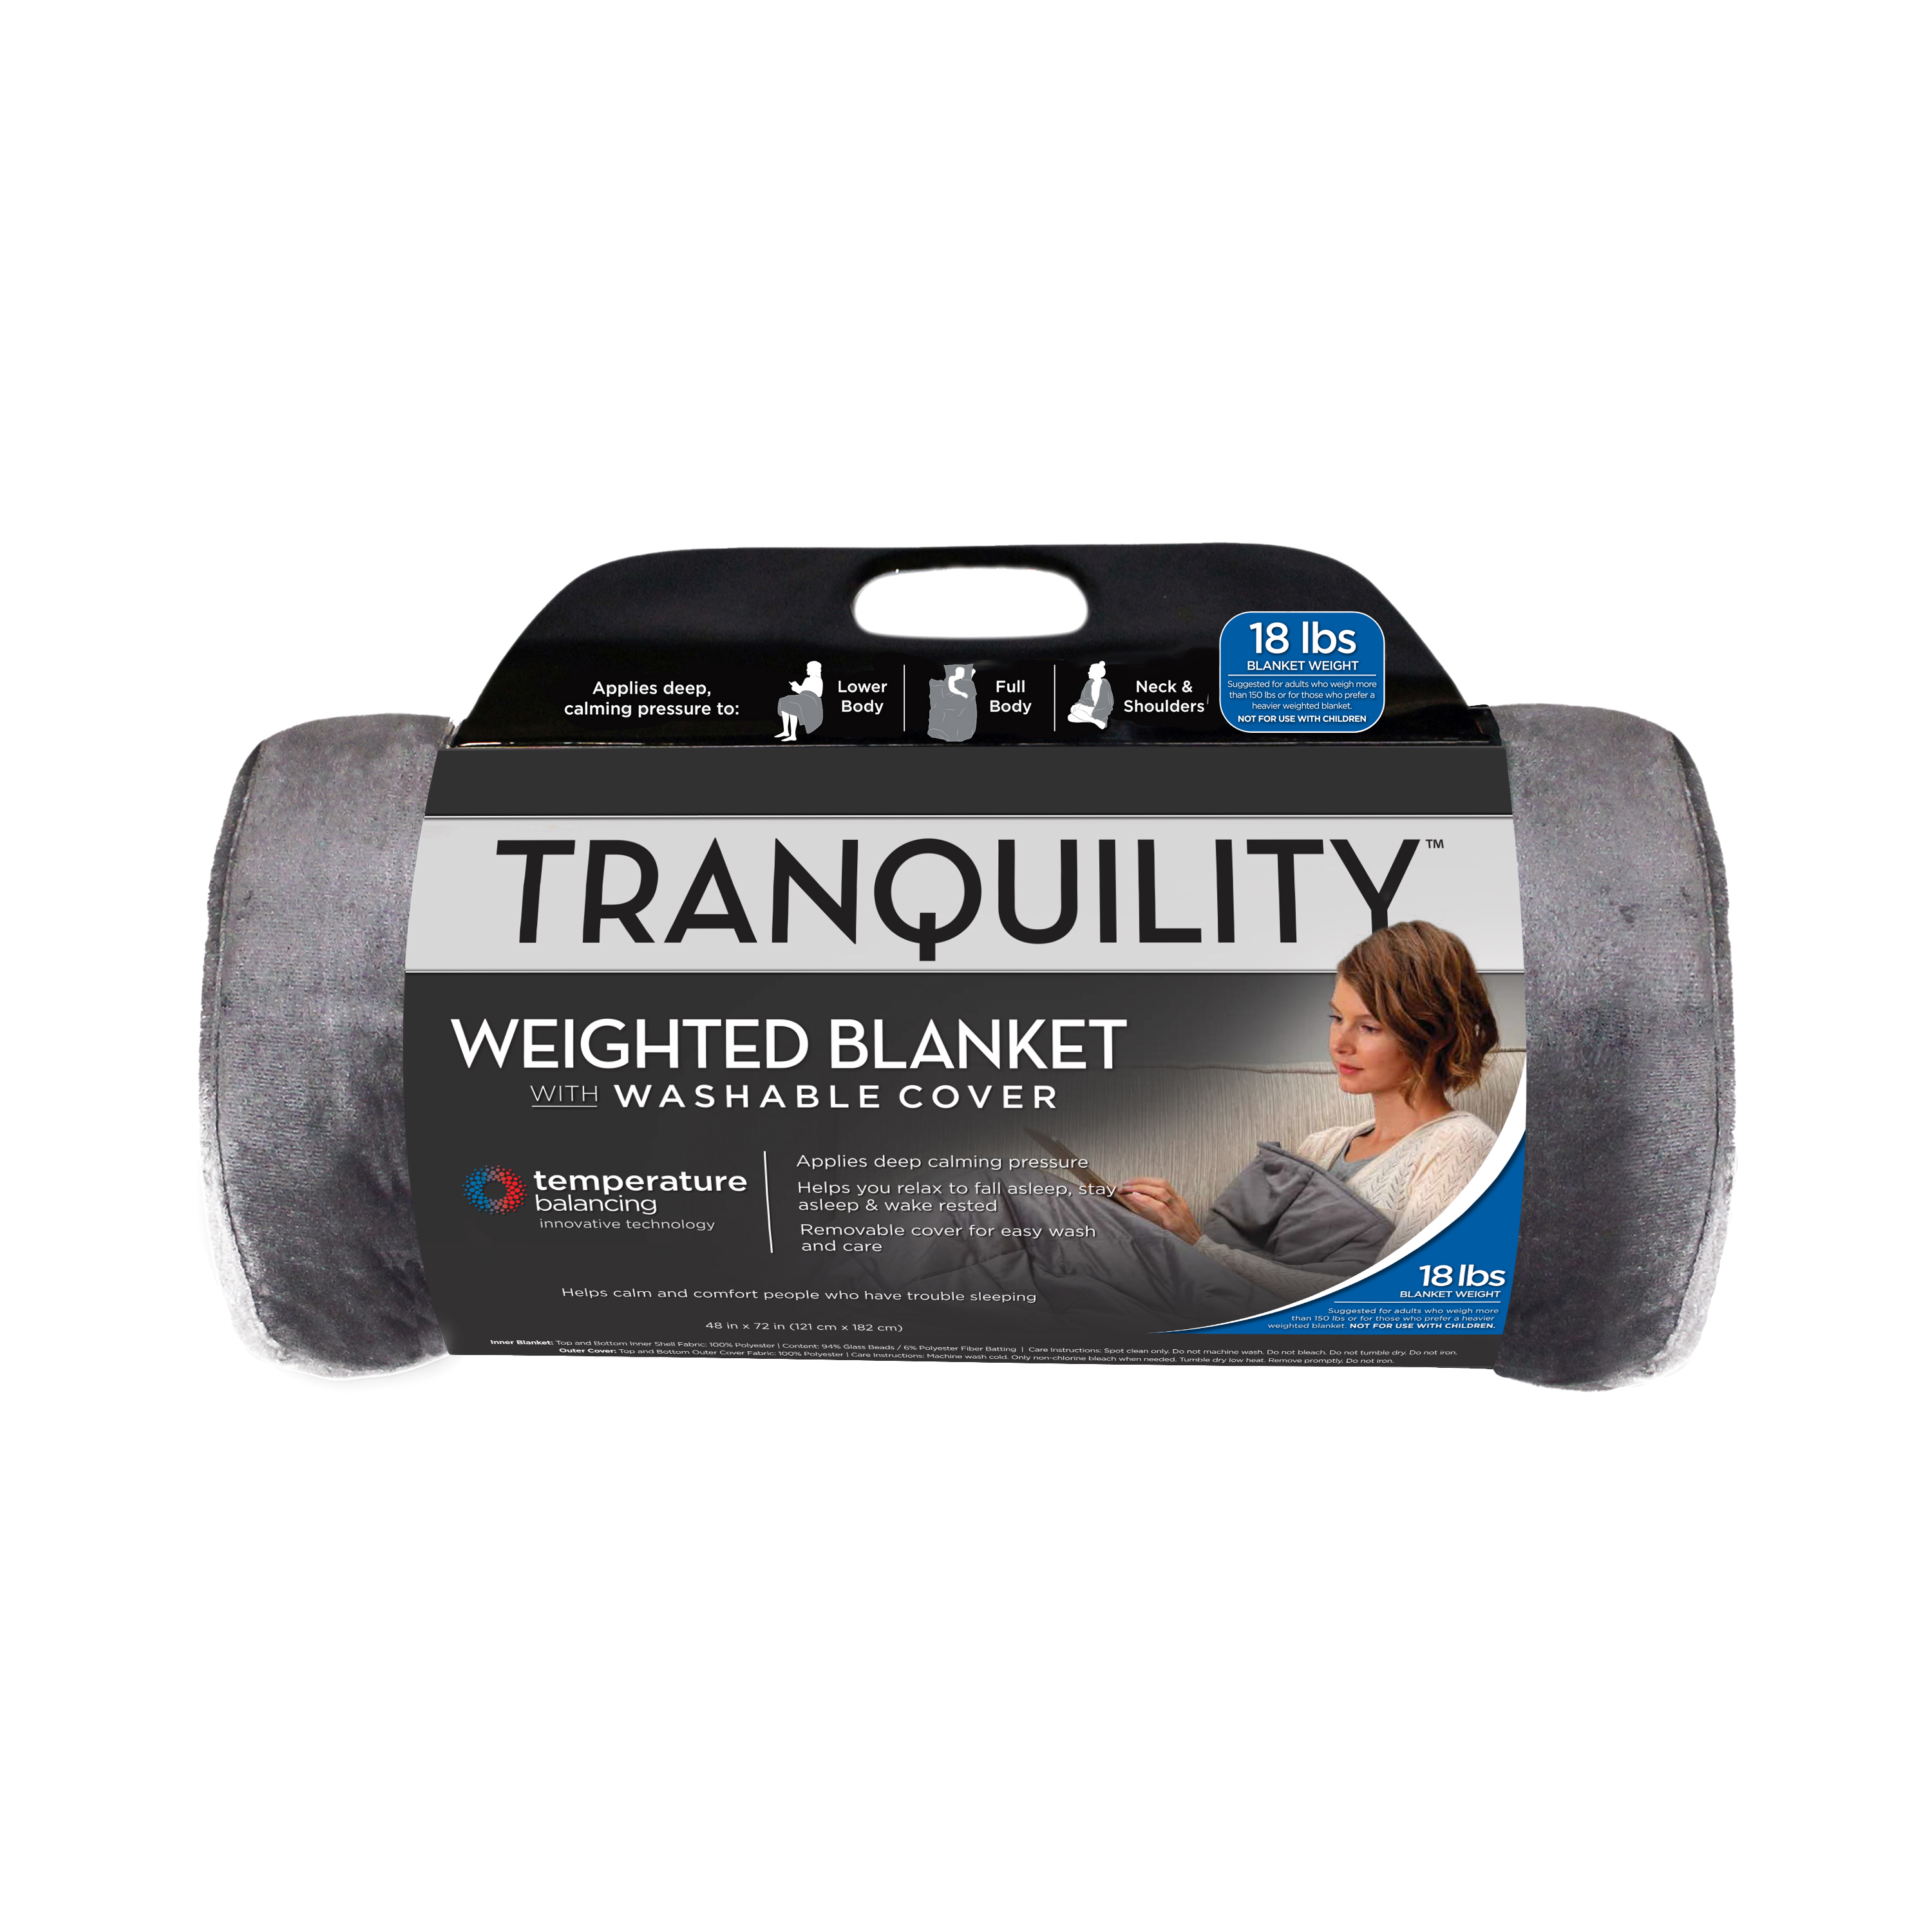 Tranquility Temperature Balancing Weighted Blanket with Washable Cover, 18 lbs - image 1 of 10